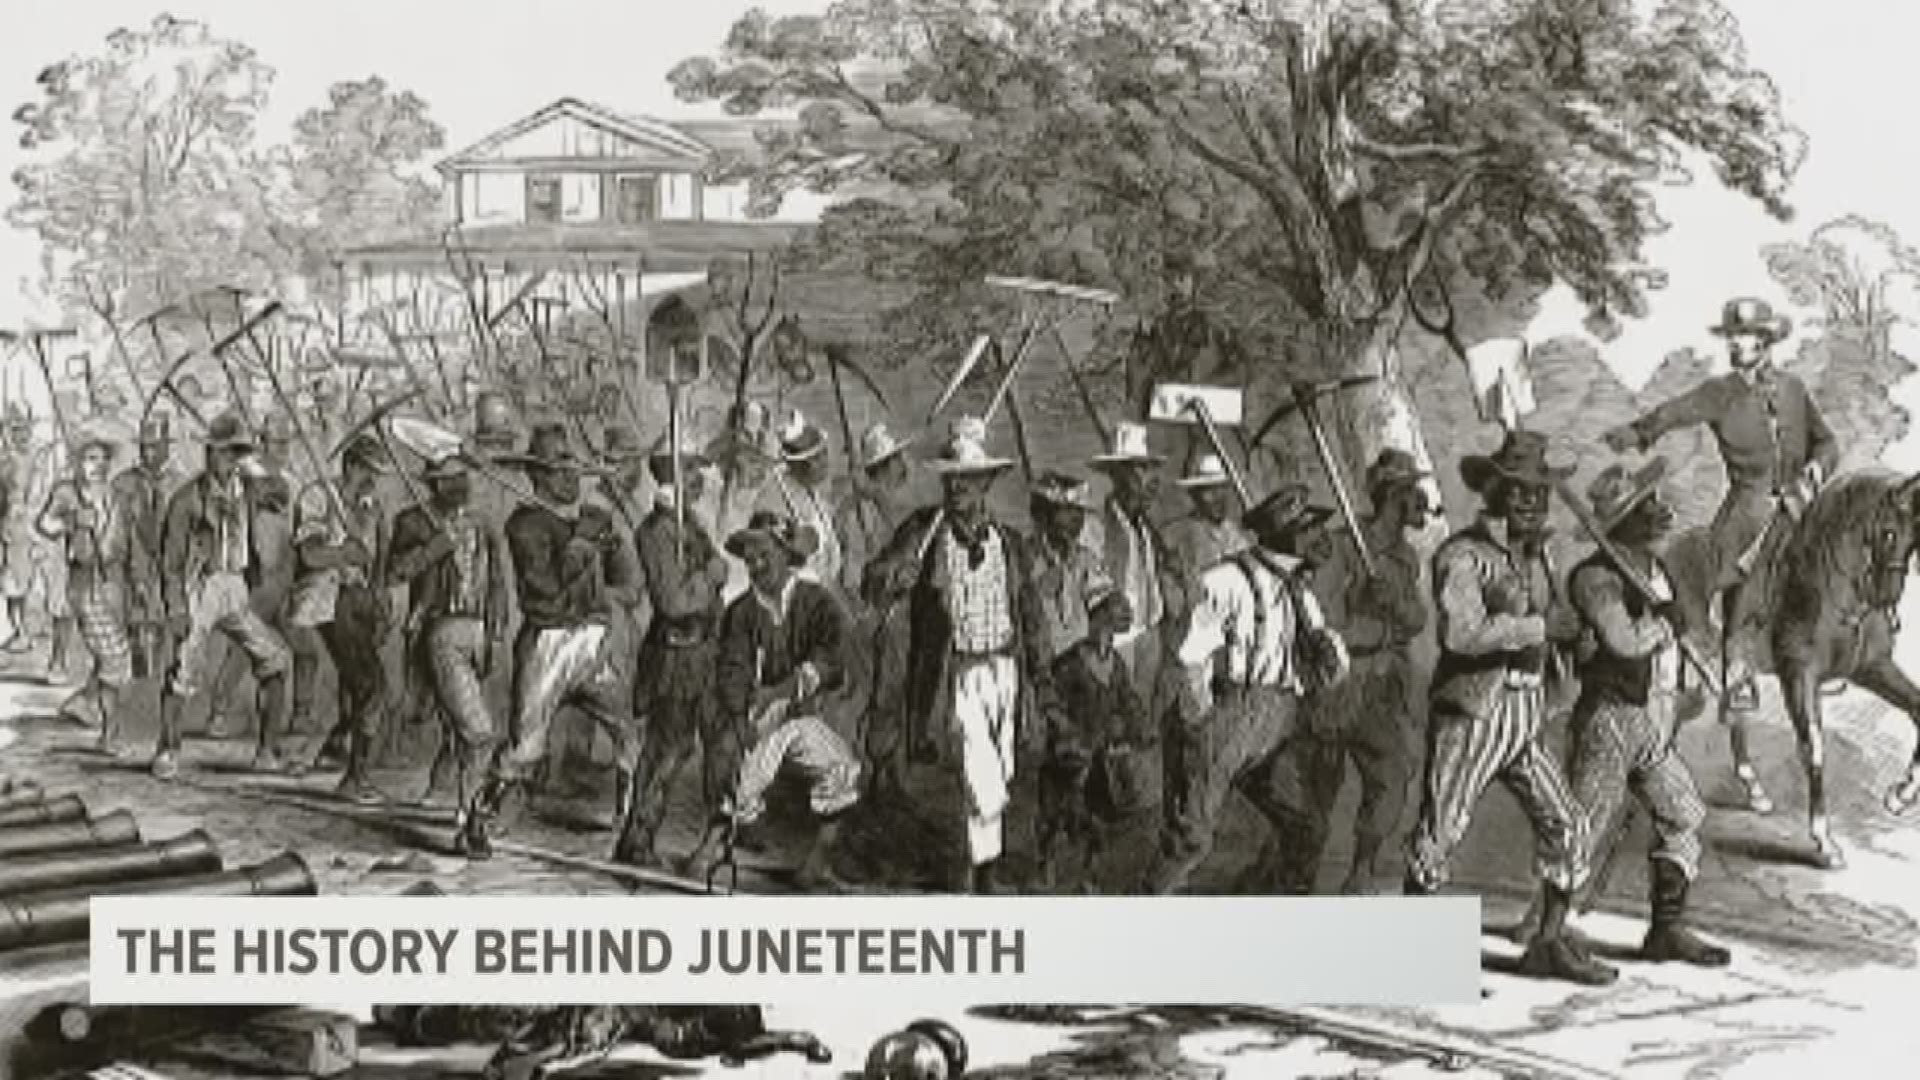 Juneteenth commemorates the day slaves in Texas found out they had been freed by the Emancipation Proclamation.